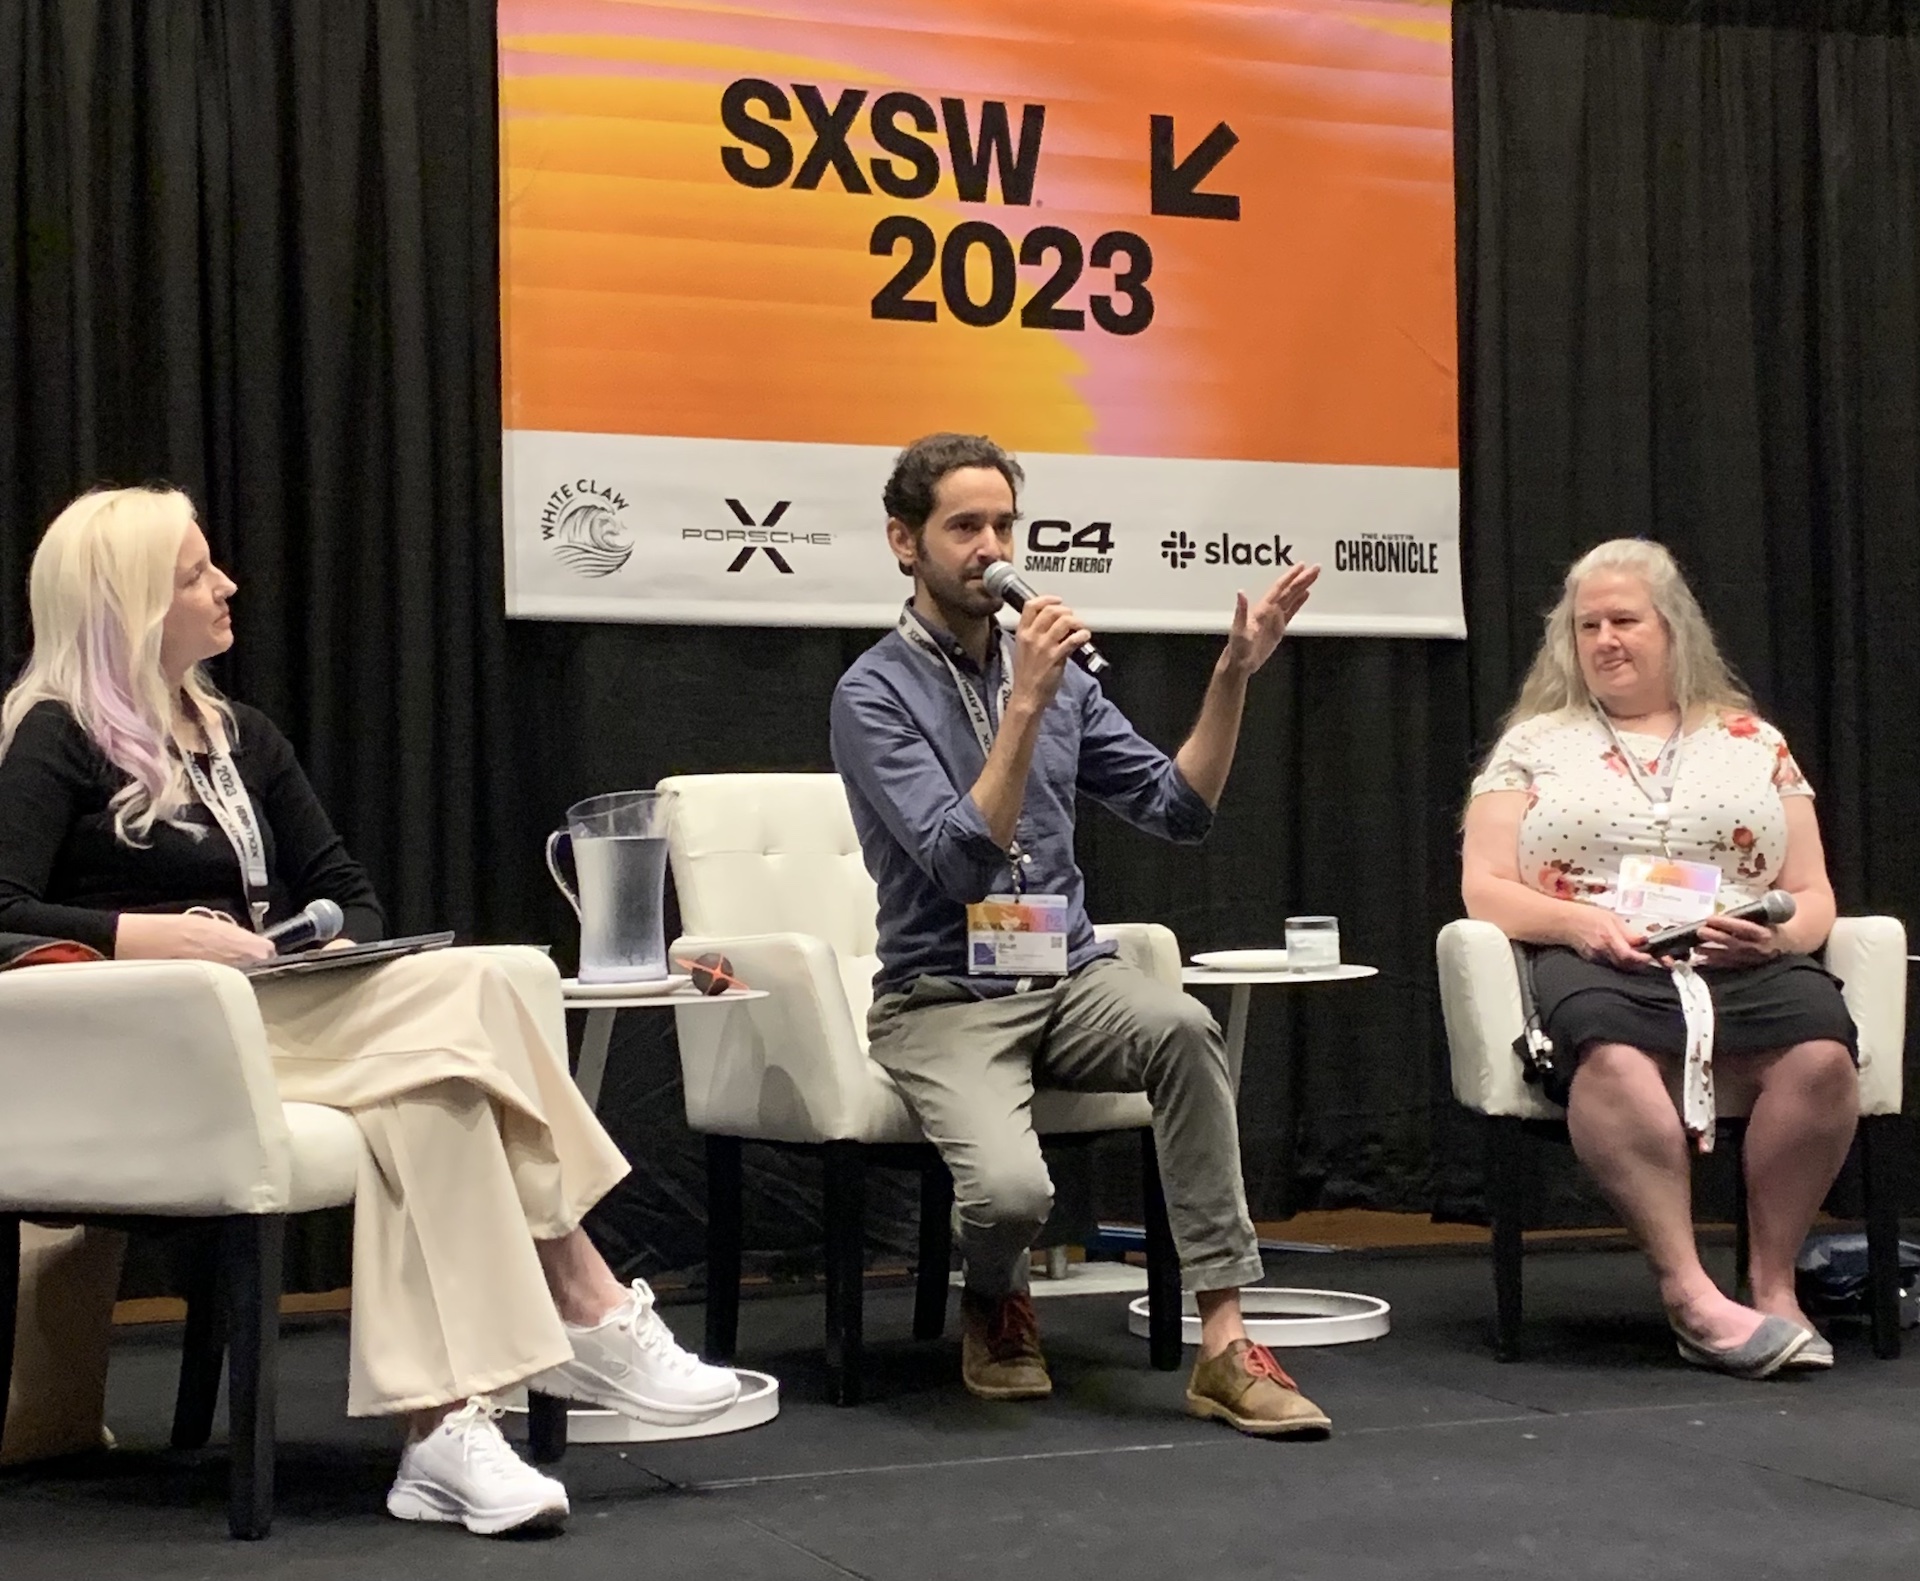 Kim, Matt, and Christine during their panel for SXSW 2023.